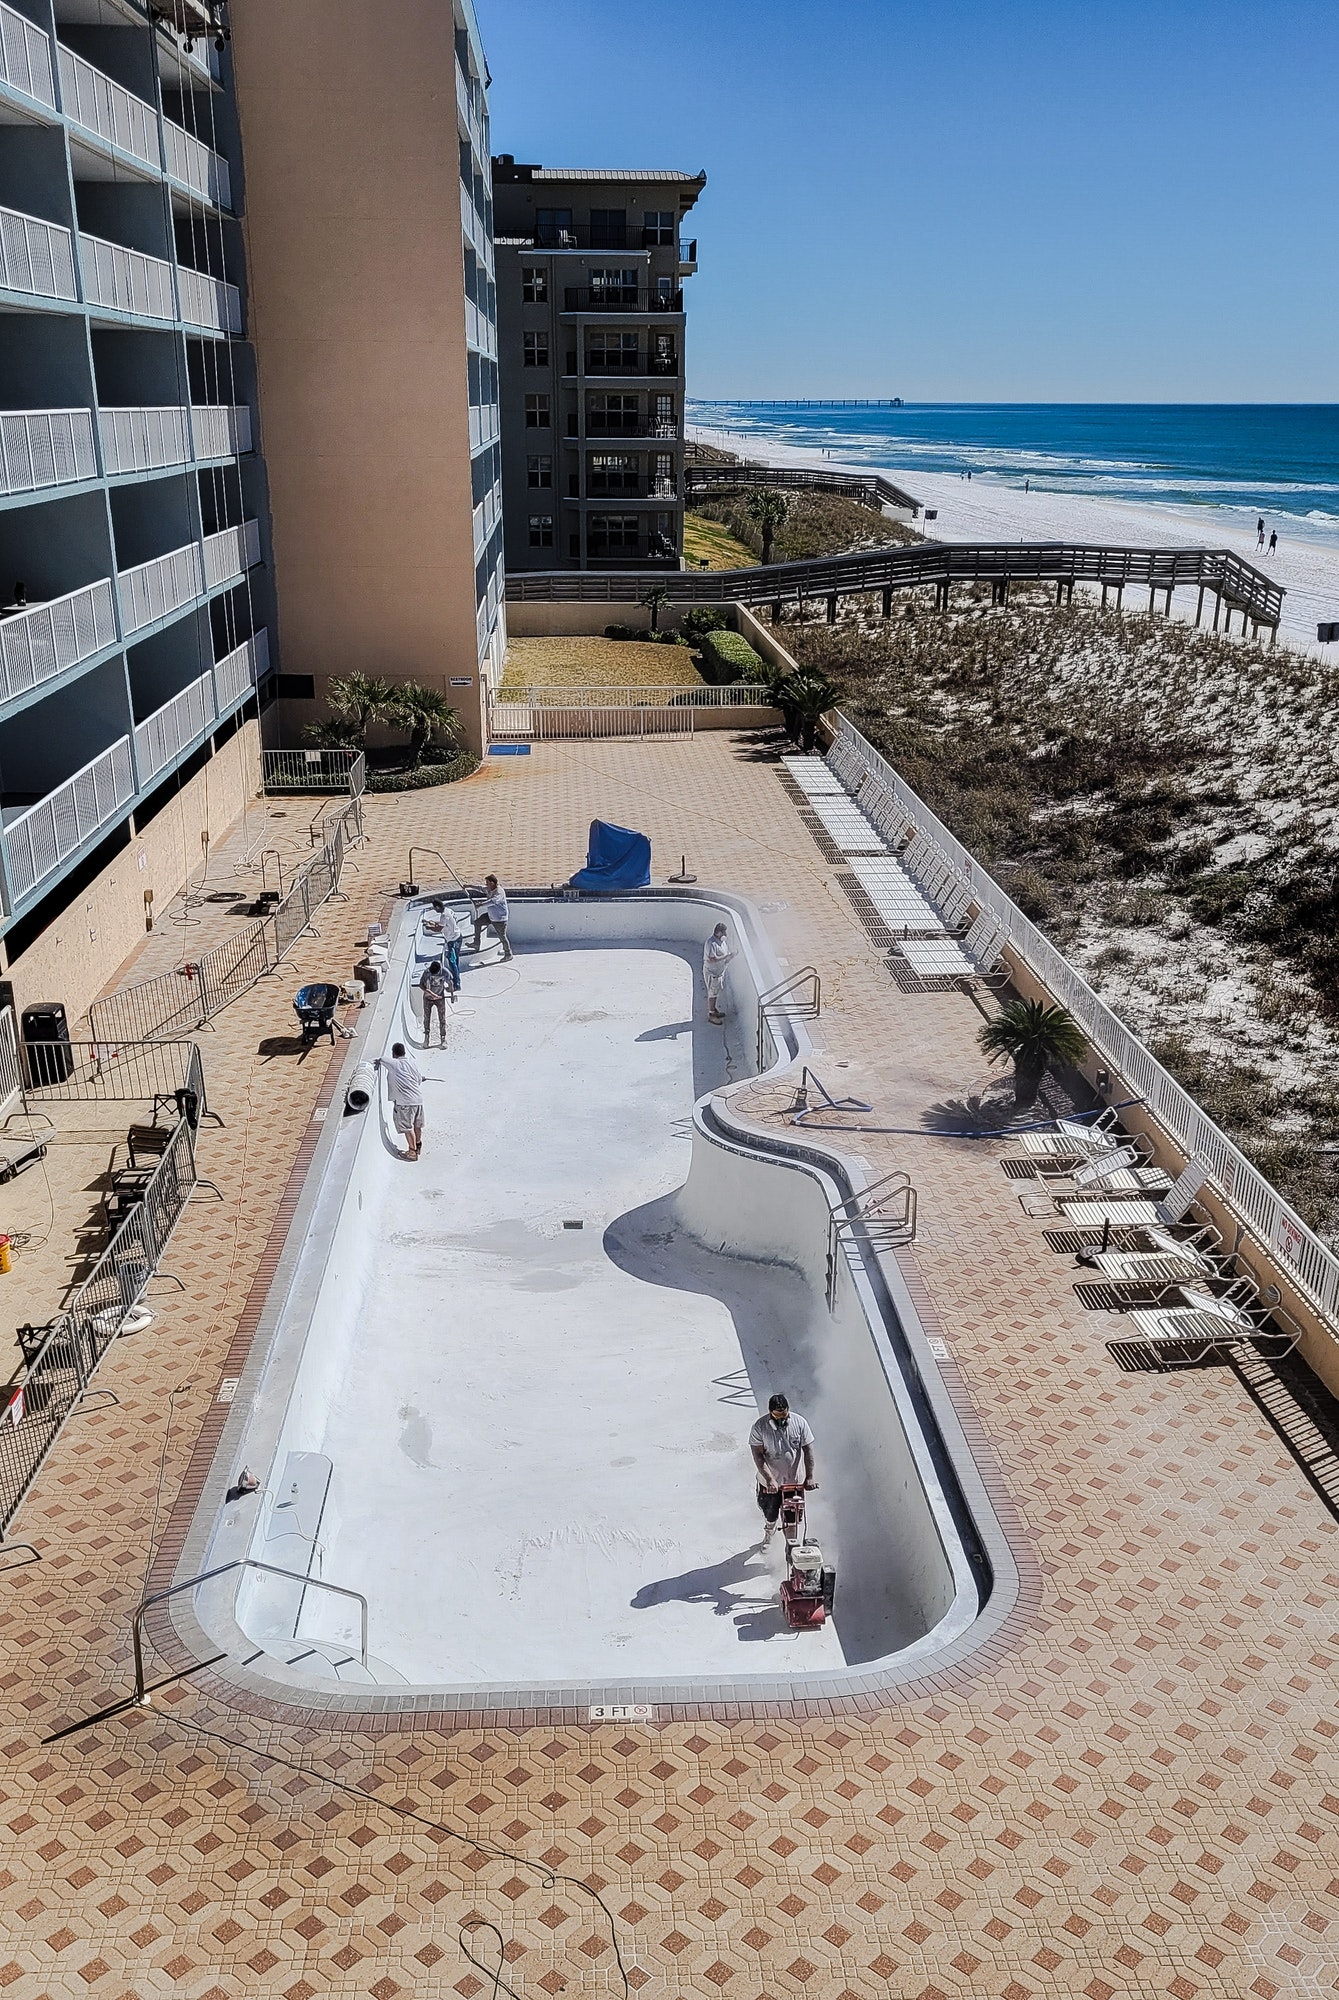 A beach pool is being resurfaced for tourists renting to enjoy pool on vacation.